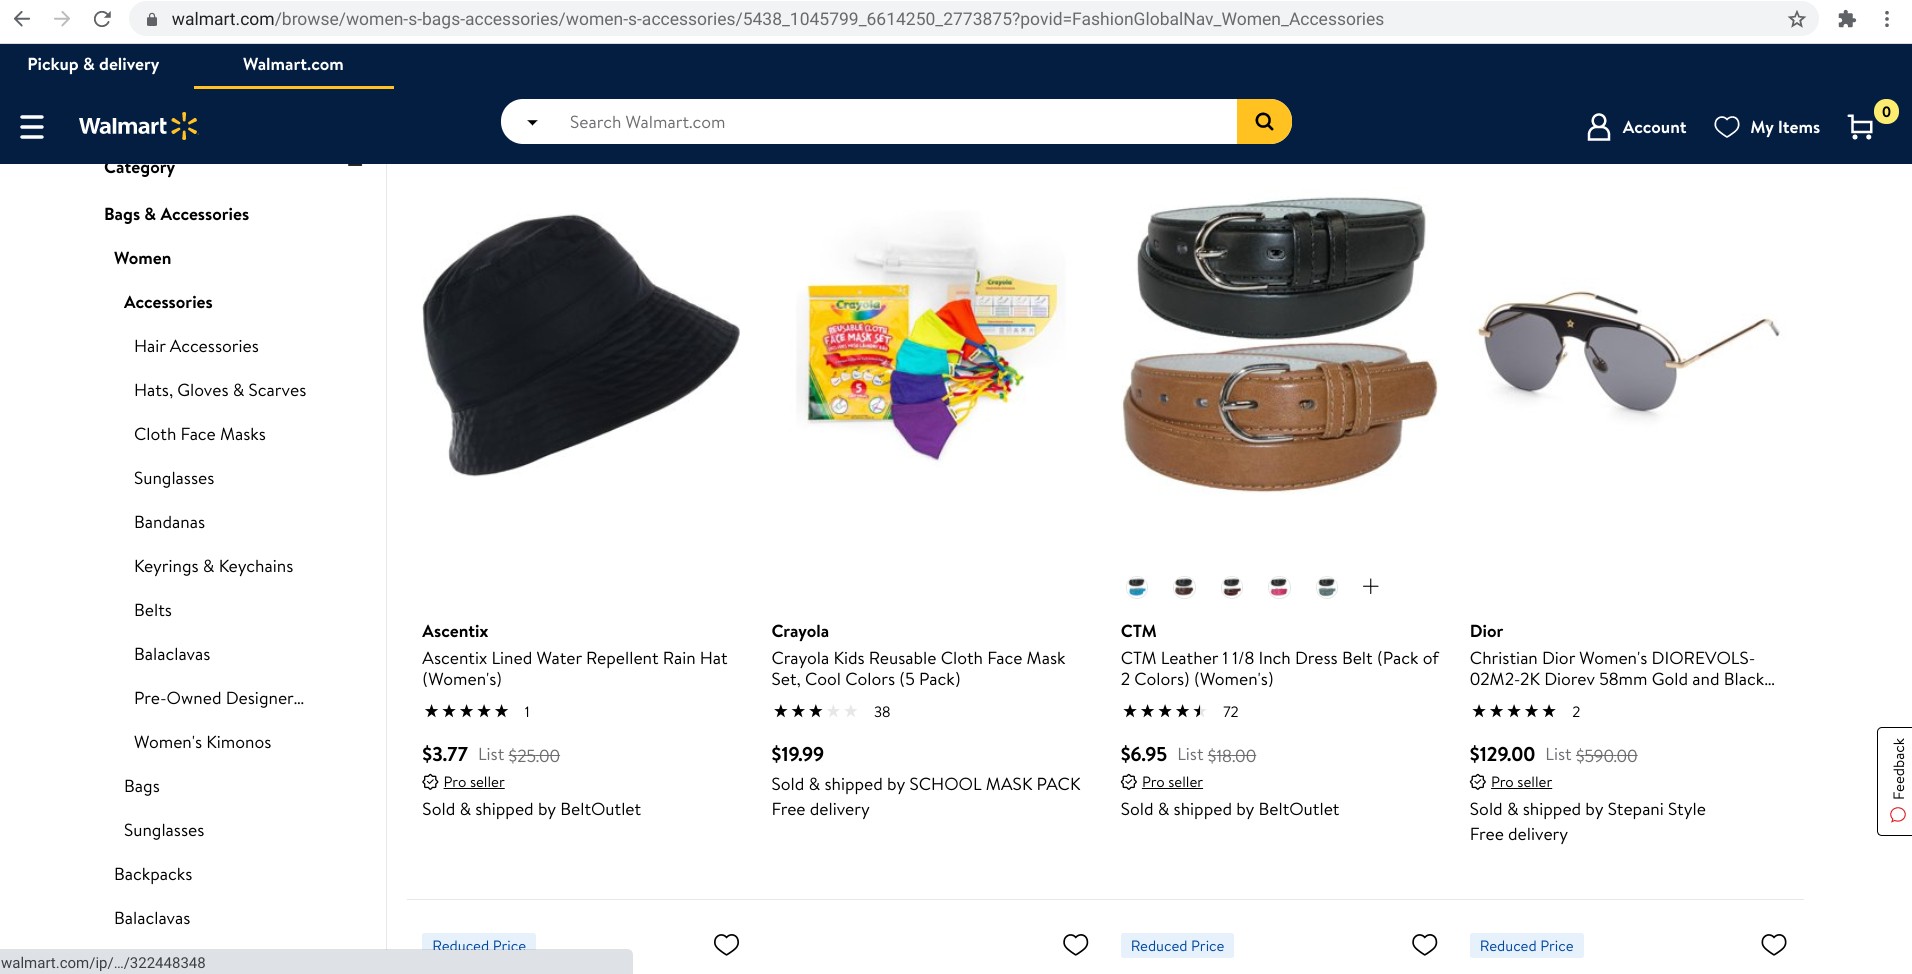 Screenshot of products on Walmart.com offered by third party sellers